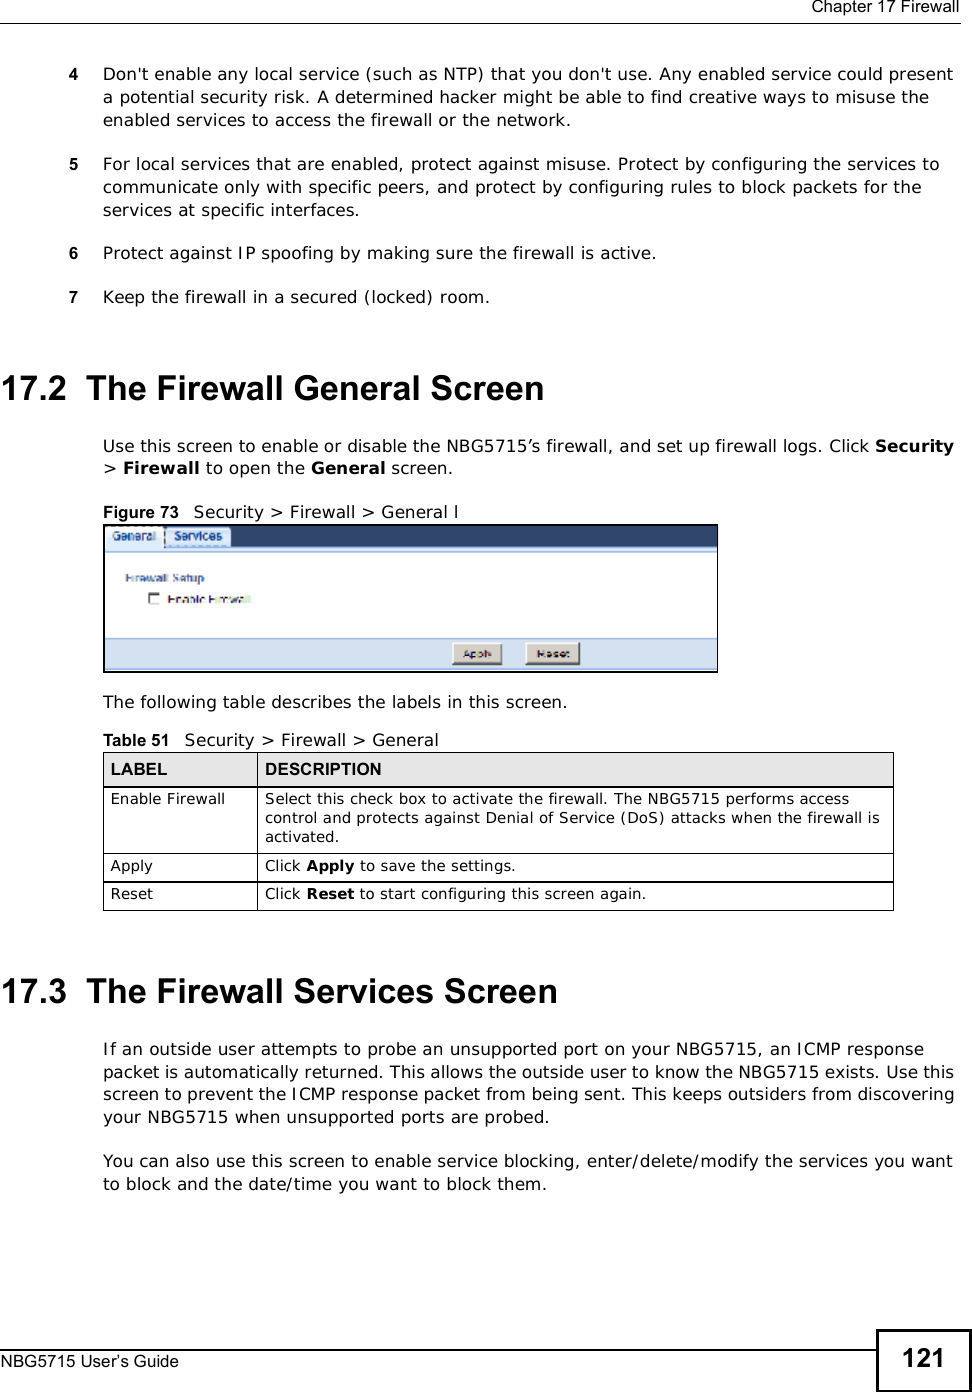  Chapter 17FirewallNBG5715 User’s Guide 1214Don&apos;t enable any local service (such as NTP) that you don&apos;t use. Any enabled service could present a potential security risk. A determined hacker might be able to find creative ways to misuse the enabled services to access the firewall or the network. 5For local services that are enabled, protect against misuse. Protect by configuring the services to communicate only with specific peers, and protect by configuring rules to block packets for the services at specific interfaces. 6Protect against IP spoofing by making sure the firewall is active. 7Keep the firewall in a secured (locked) room. 17.2  The Firewall General ScreenUse this screen to enable or disable the NBG5715’s firewall, and set up firewall logs. Click Security&gt;Firewall to open the General screen.Figure 73   Security &gt; Firewall &gt; General lThe following table describes the labels in this screen.17.3  The Firewall Services Screen If an outside user attempts to probe an unsupported port on your NBG5715, an ICMP response packet is automatically returned. This allows the outside user to know the NBG5715 exists. Use this screen to prevent the ICMP response packet from being sent. This keeps outsiders from discovering your NBG5715 when unsupported ports are probed.You can also use this screen to enable service blocking, enter/delete/modify the services you want to block and the date/time you want to block them.Table 51   Security &gt; Firewall &gt; General LABEL DESCRIPTIONEnable FirewallSelect this check box to activate the firewall. The NBG5715 performs access control and protects against Denial of Service (DoS) attacks when the firewall is activated.Apply Click Apply to save the settings. Reset Click Reset to start configuring this screen again. 